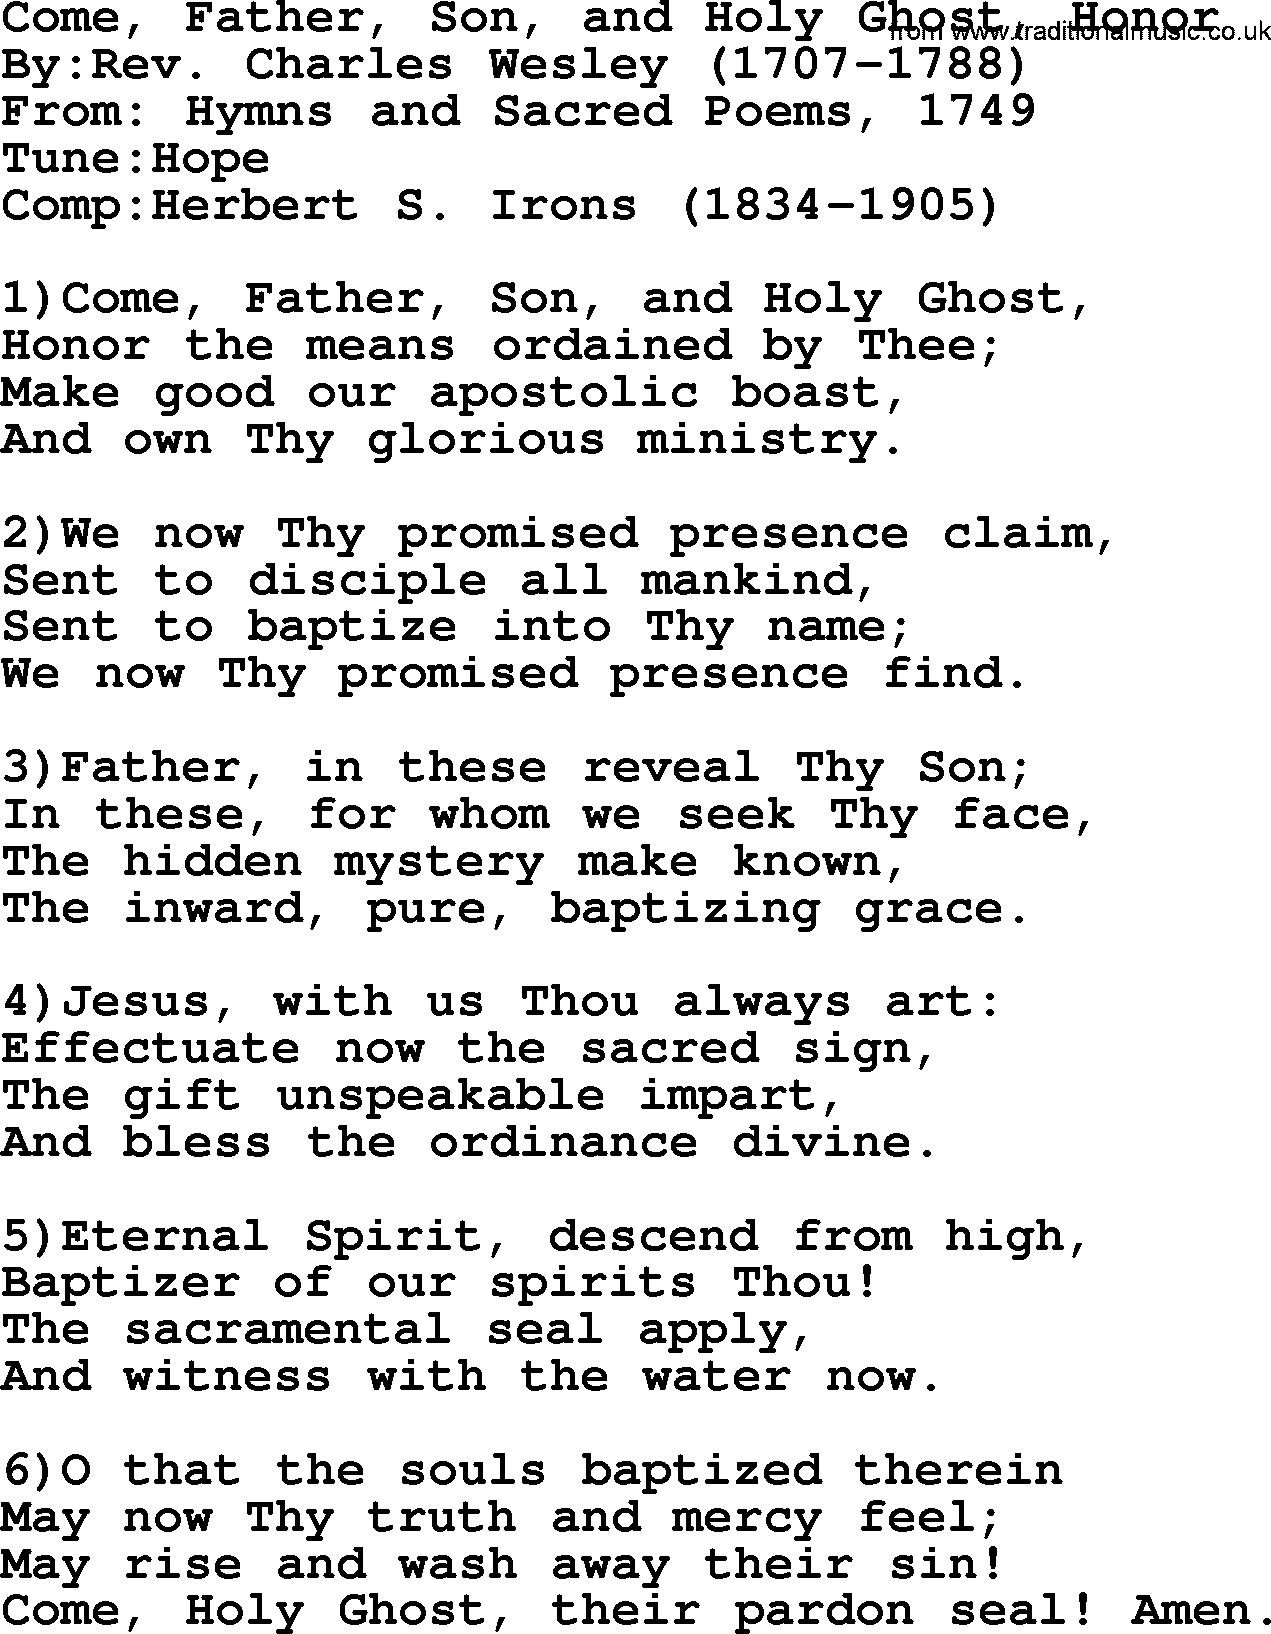 Methodist Hymn: Come, Father, Son, And Holy Ghost, Honor, lyrics